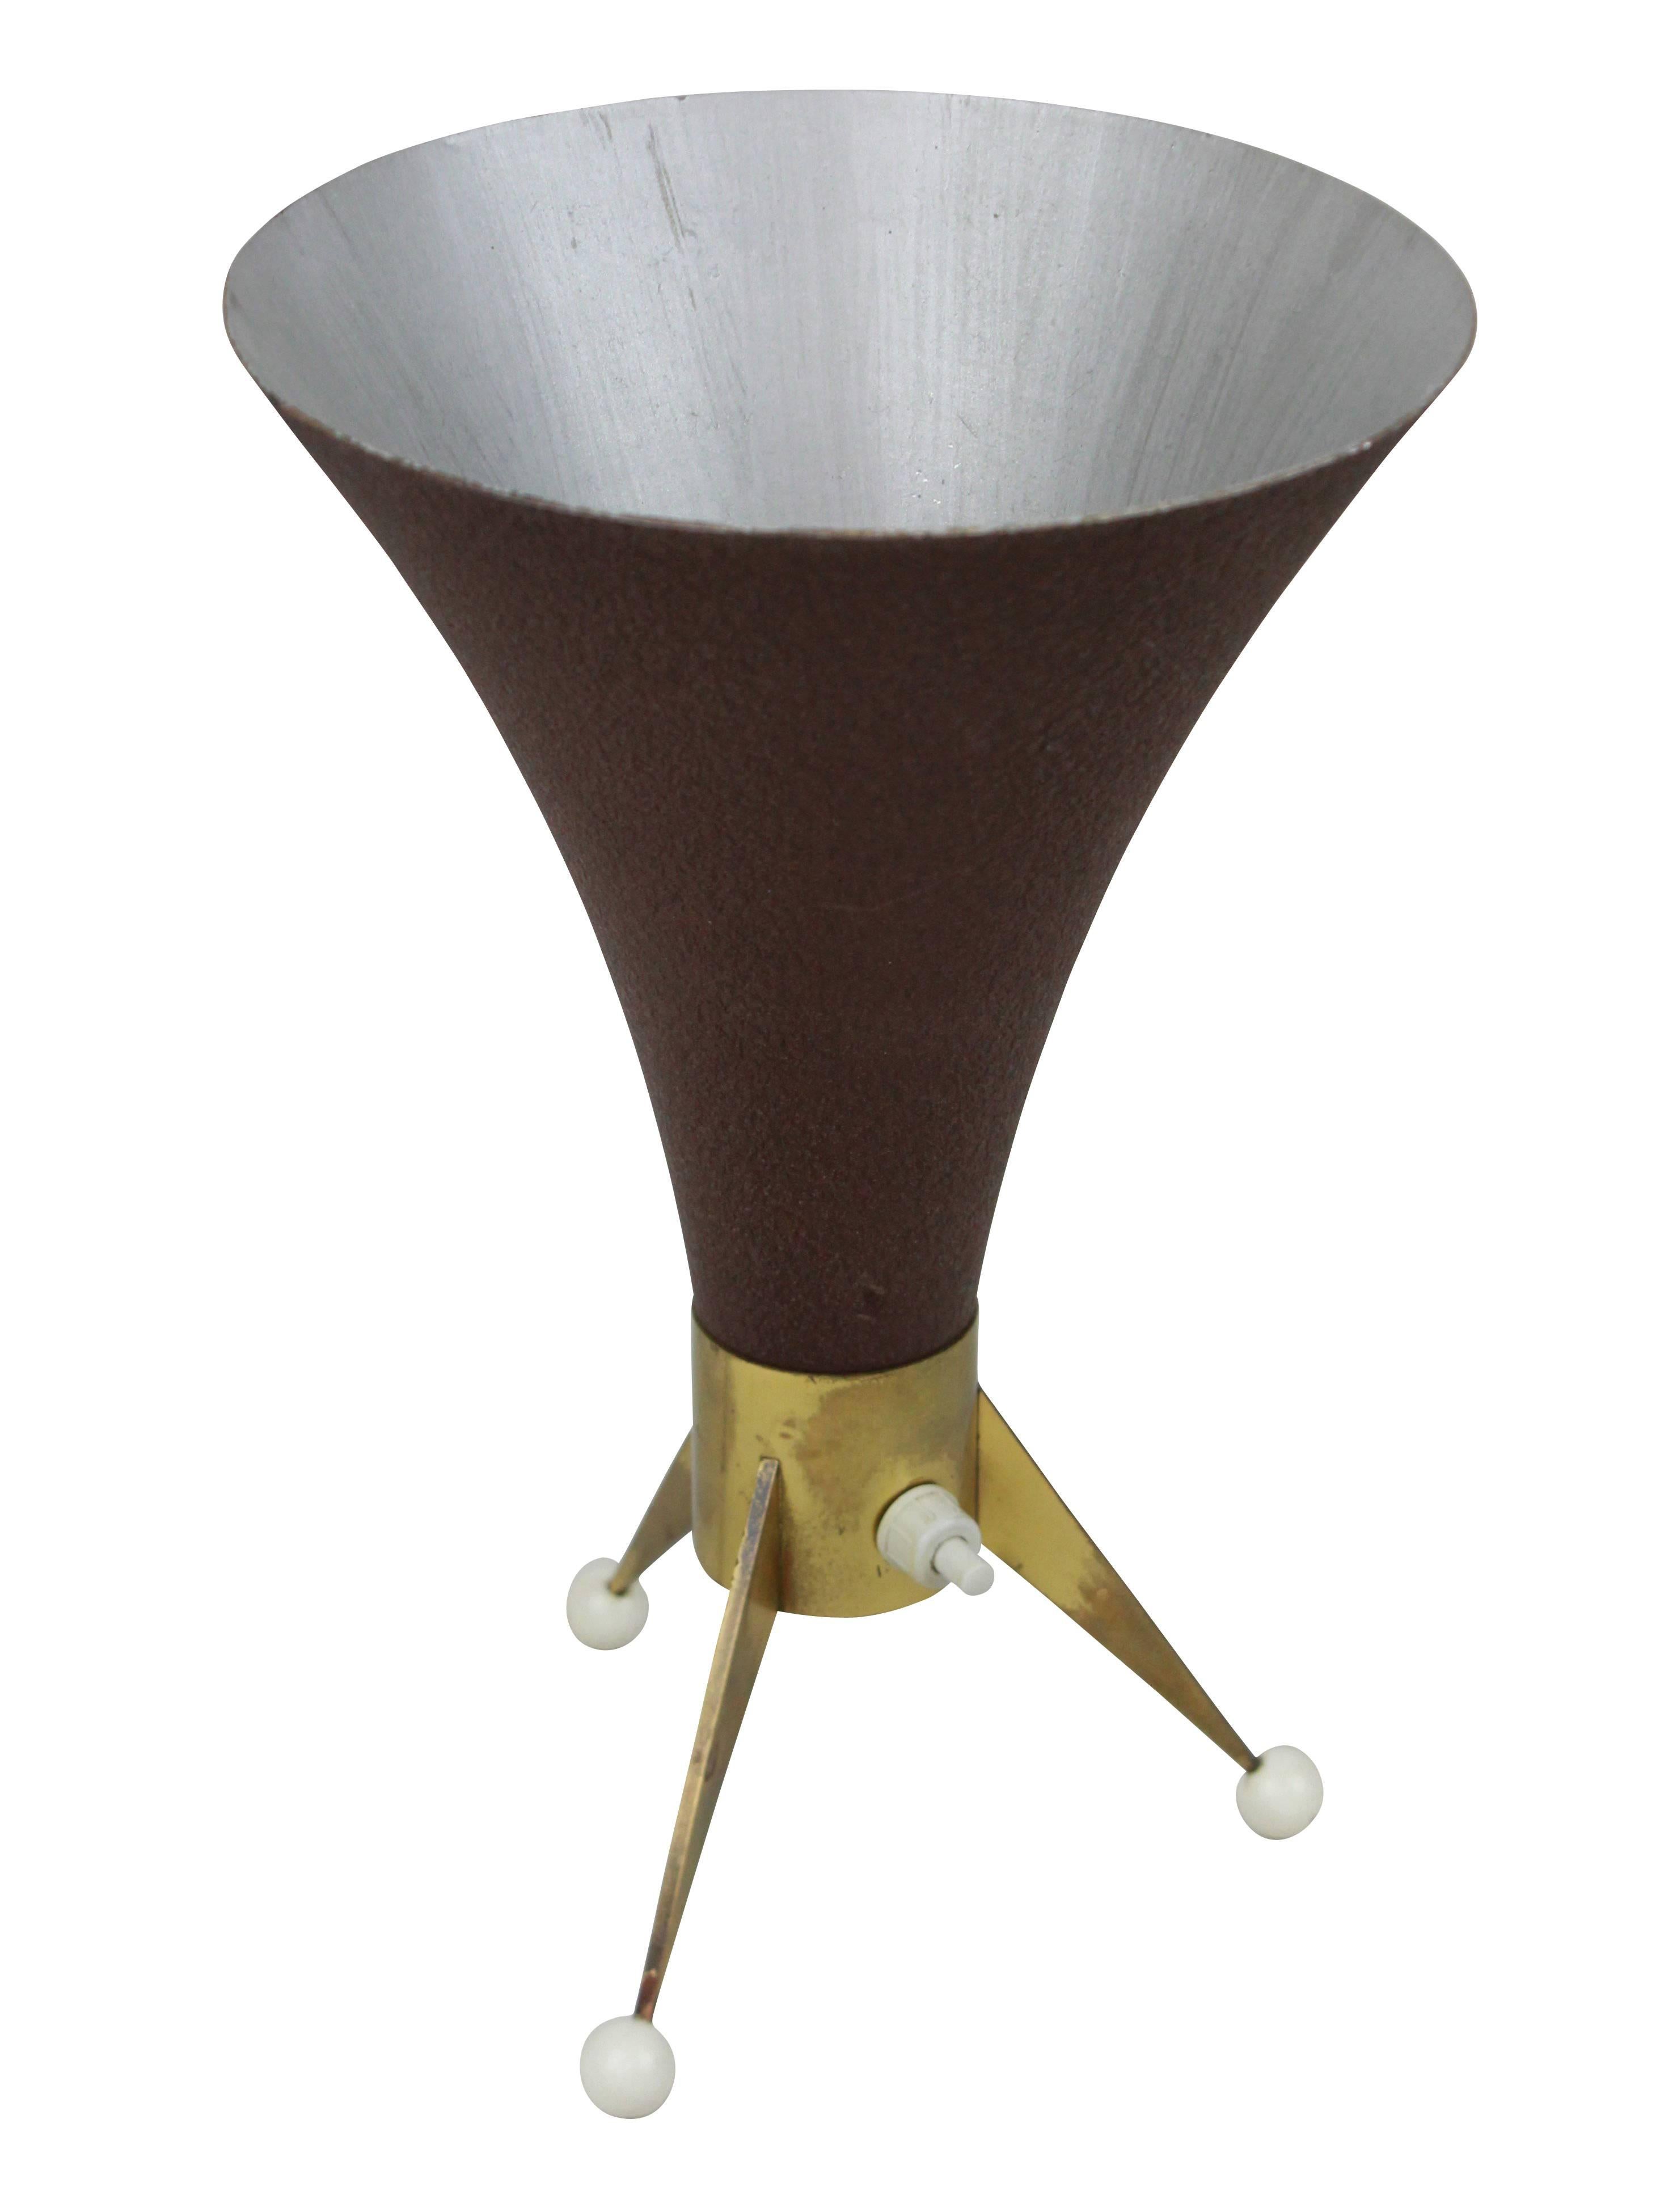 A stylish Italian desk lamp on a triform brass base with a conical uplighter.